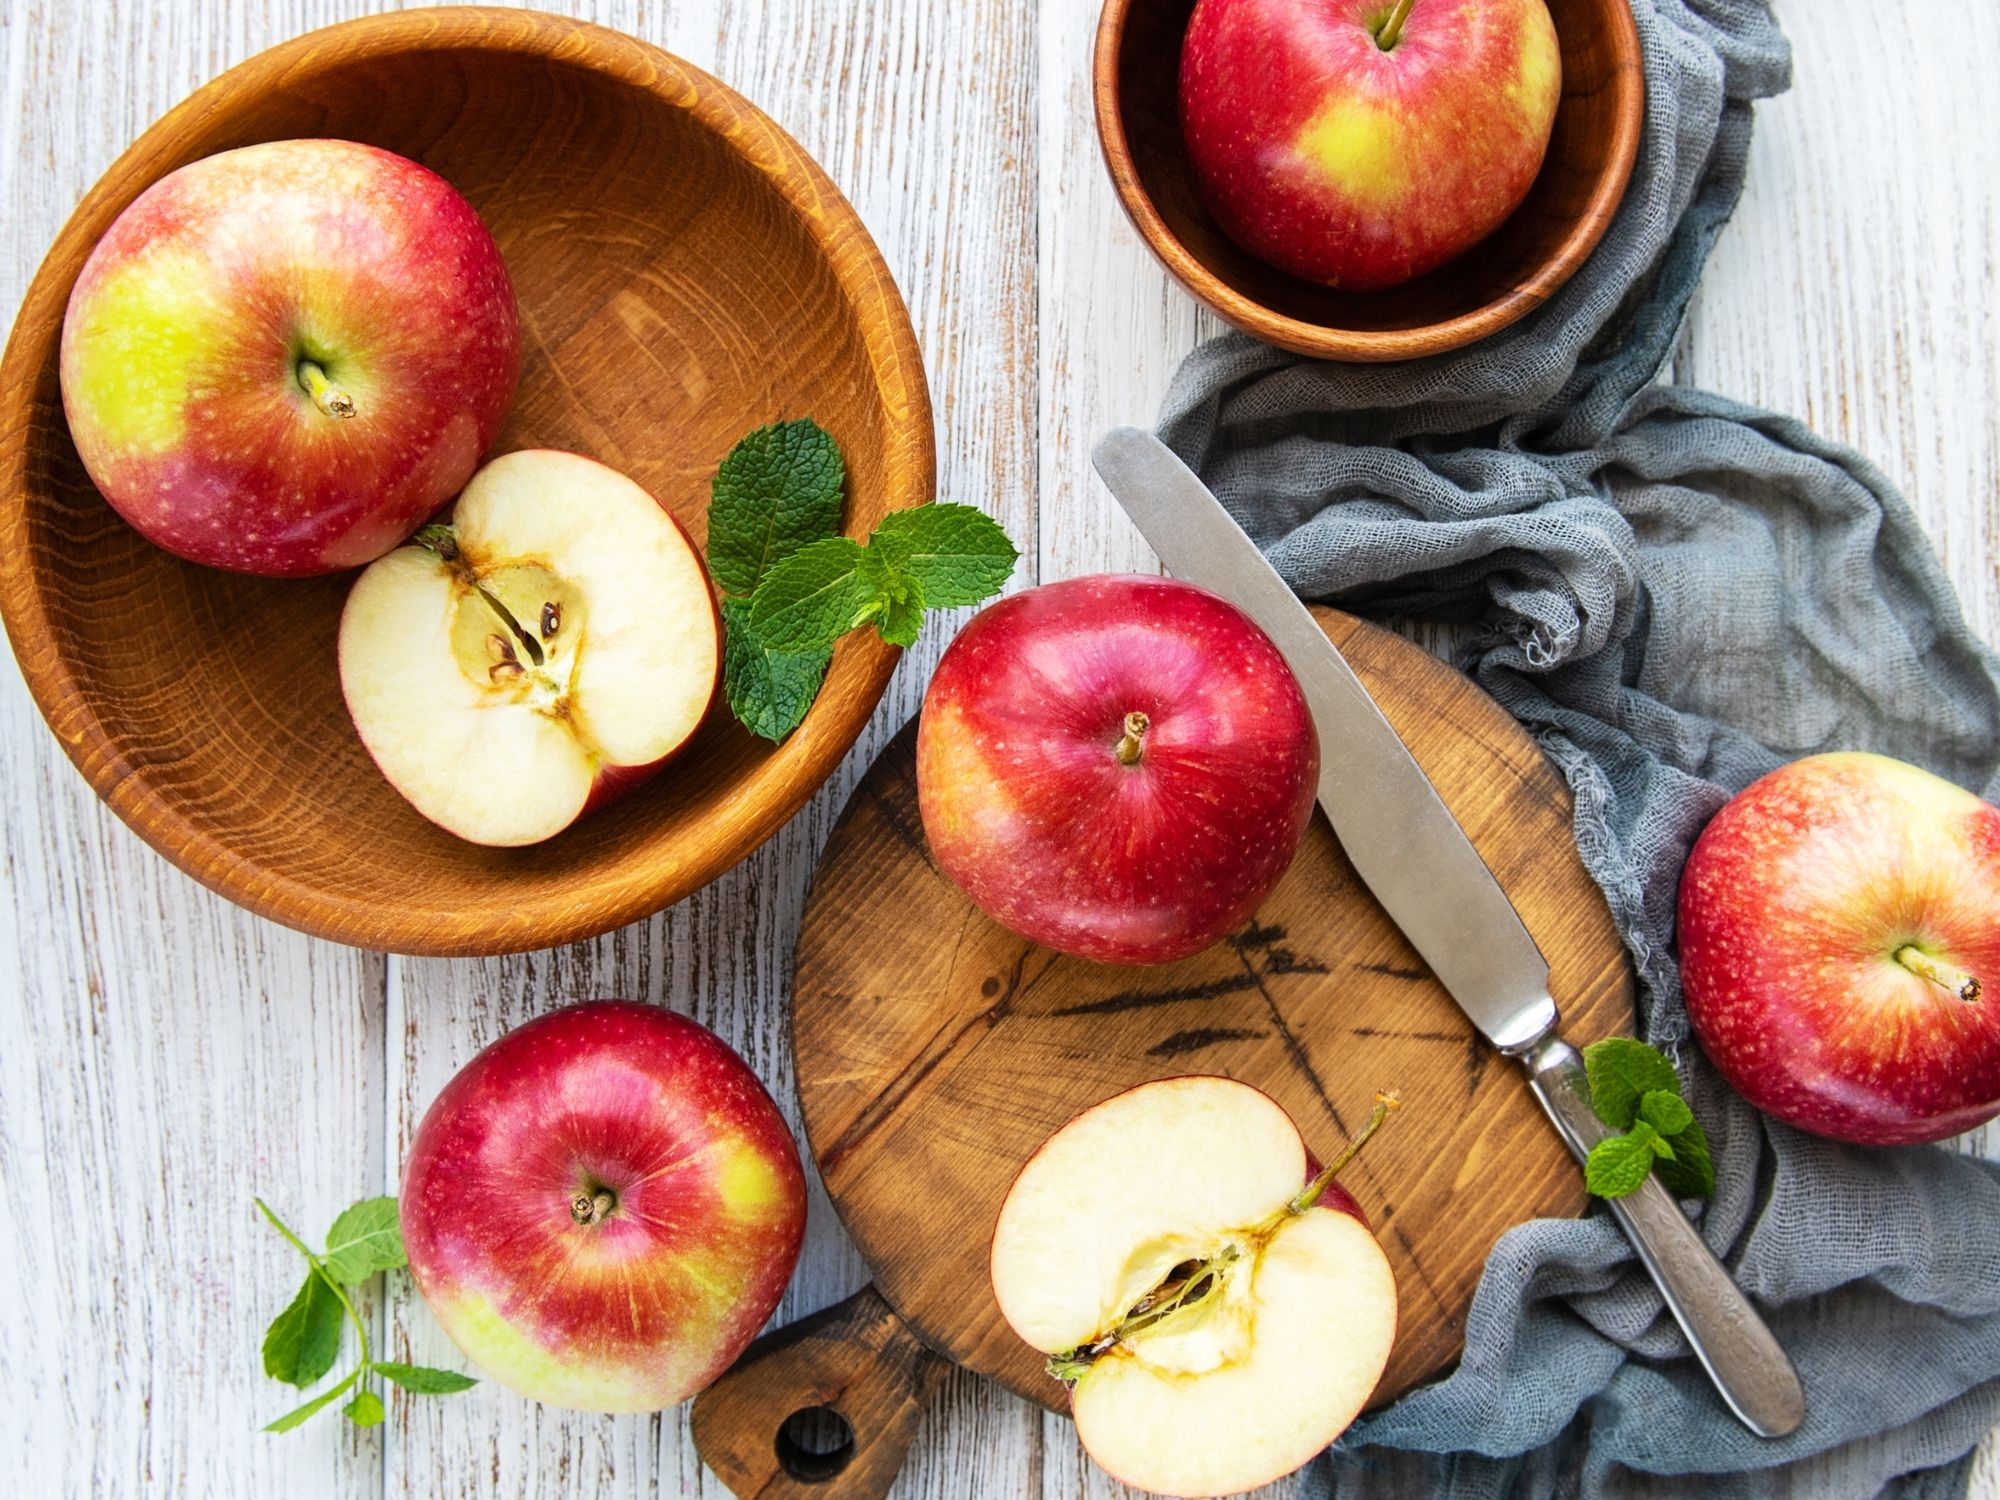 How To Use Up Apples and Pears To Beat Food Waste